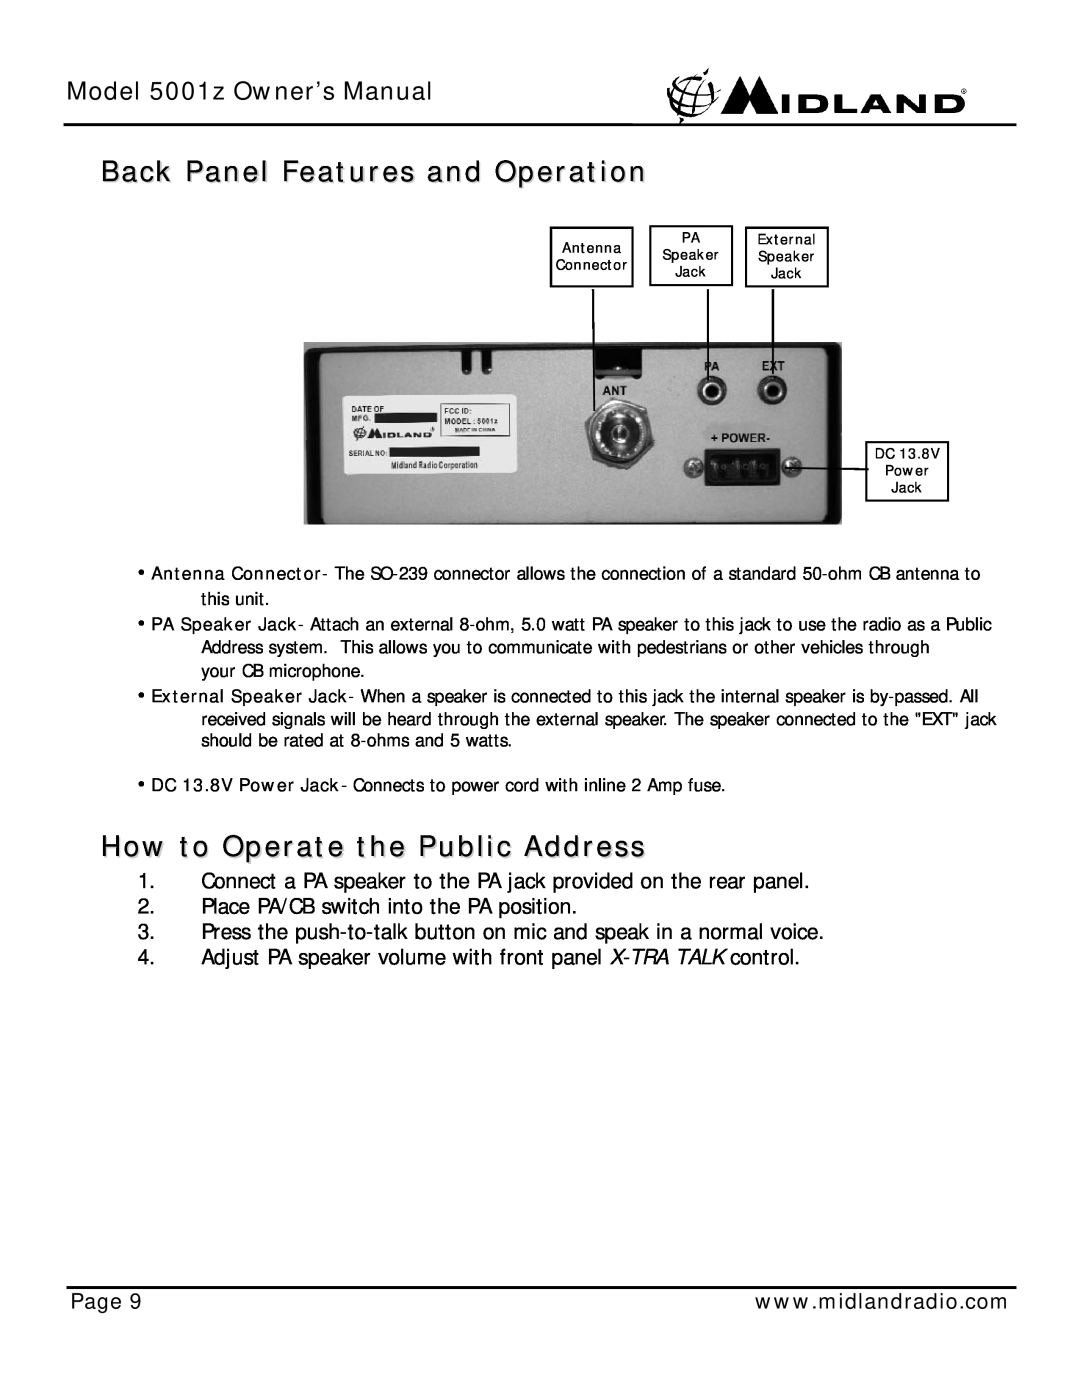 Midland Radio 5001z owner manual Back Panel Features and Operation, How to Operate the Public Address, Page 